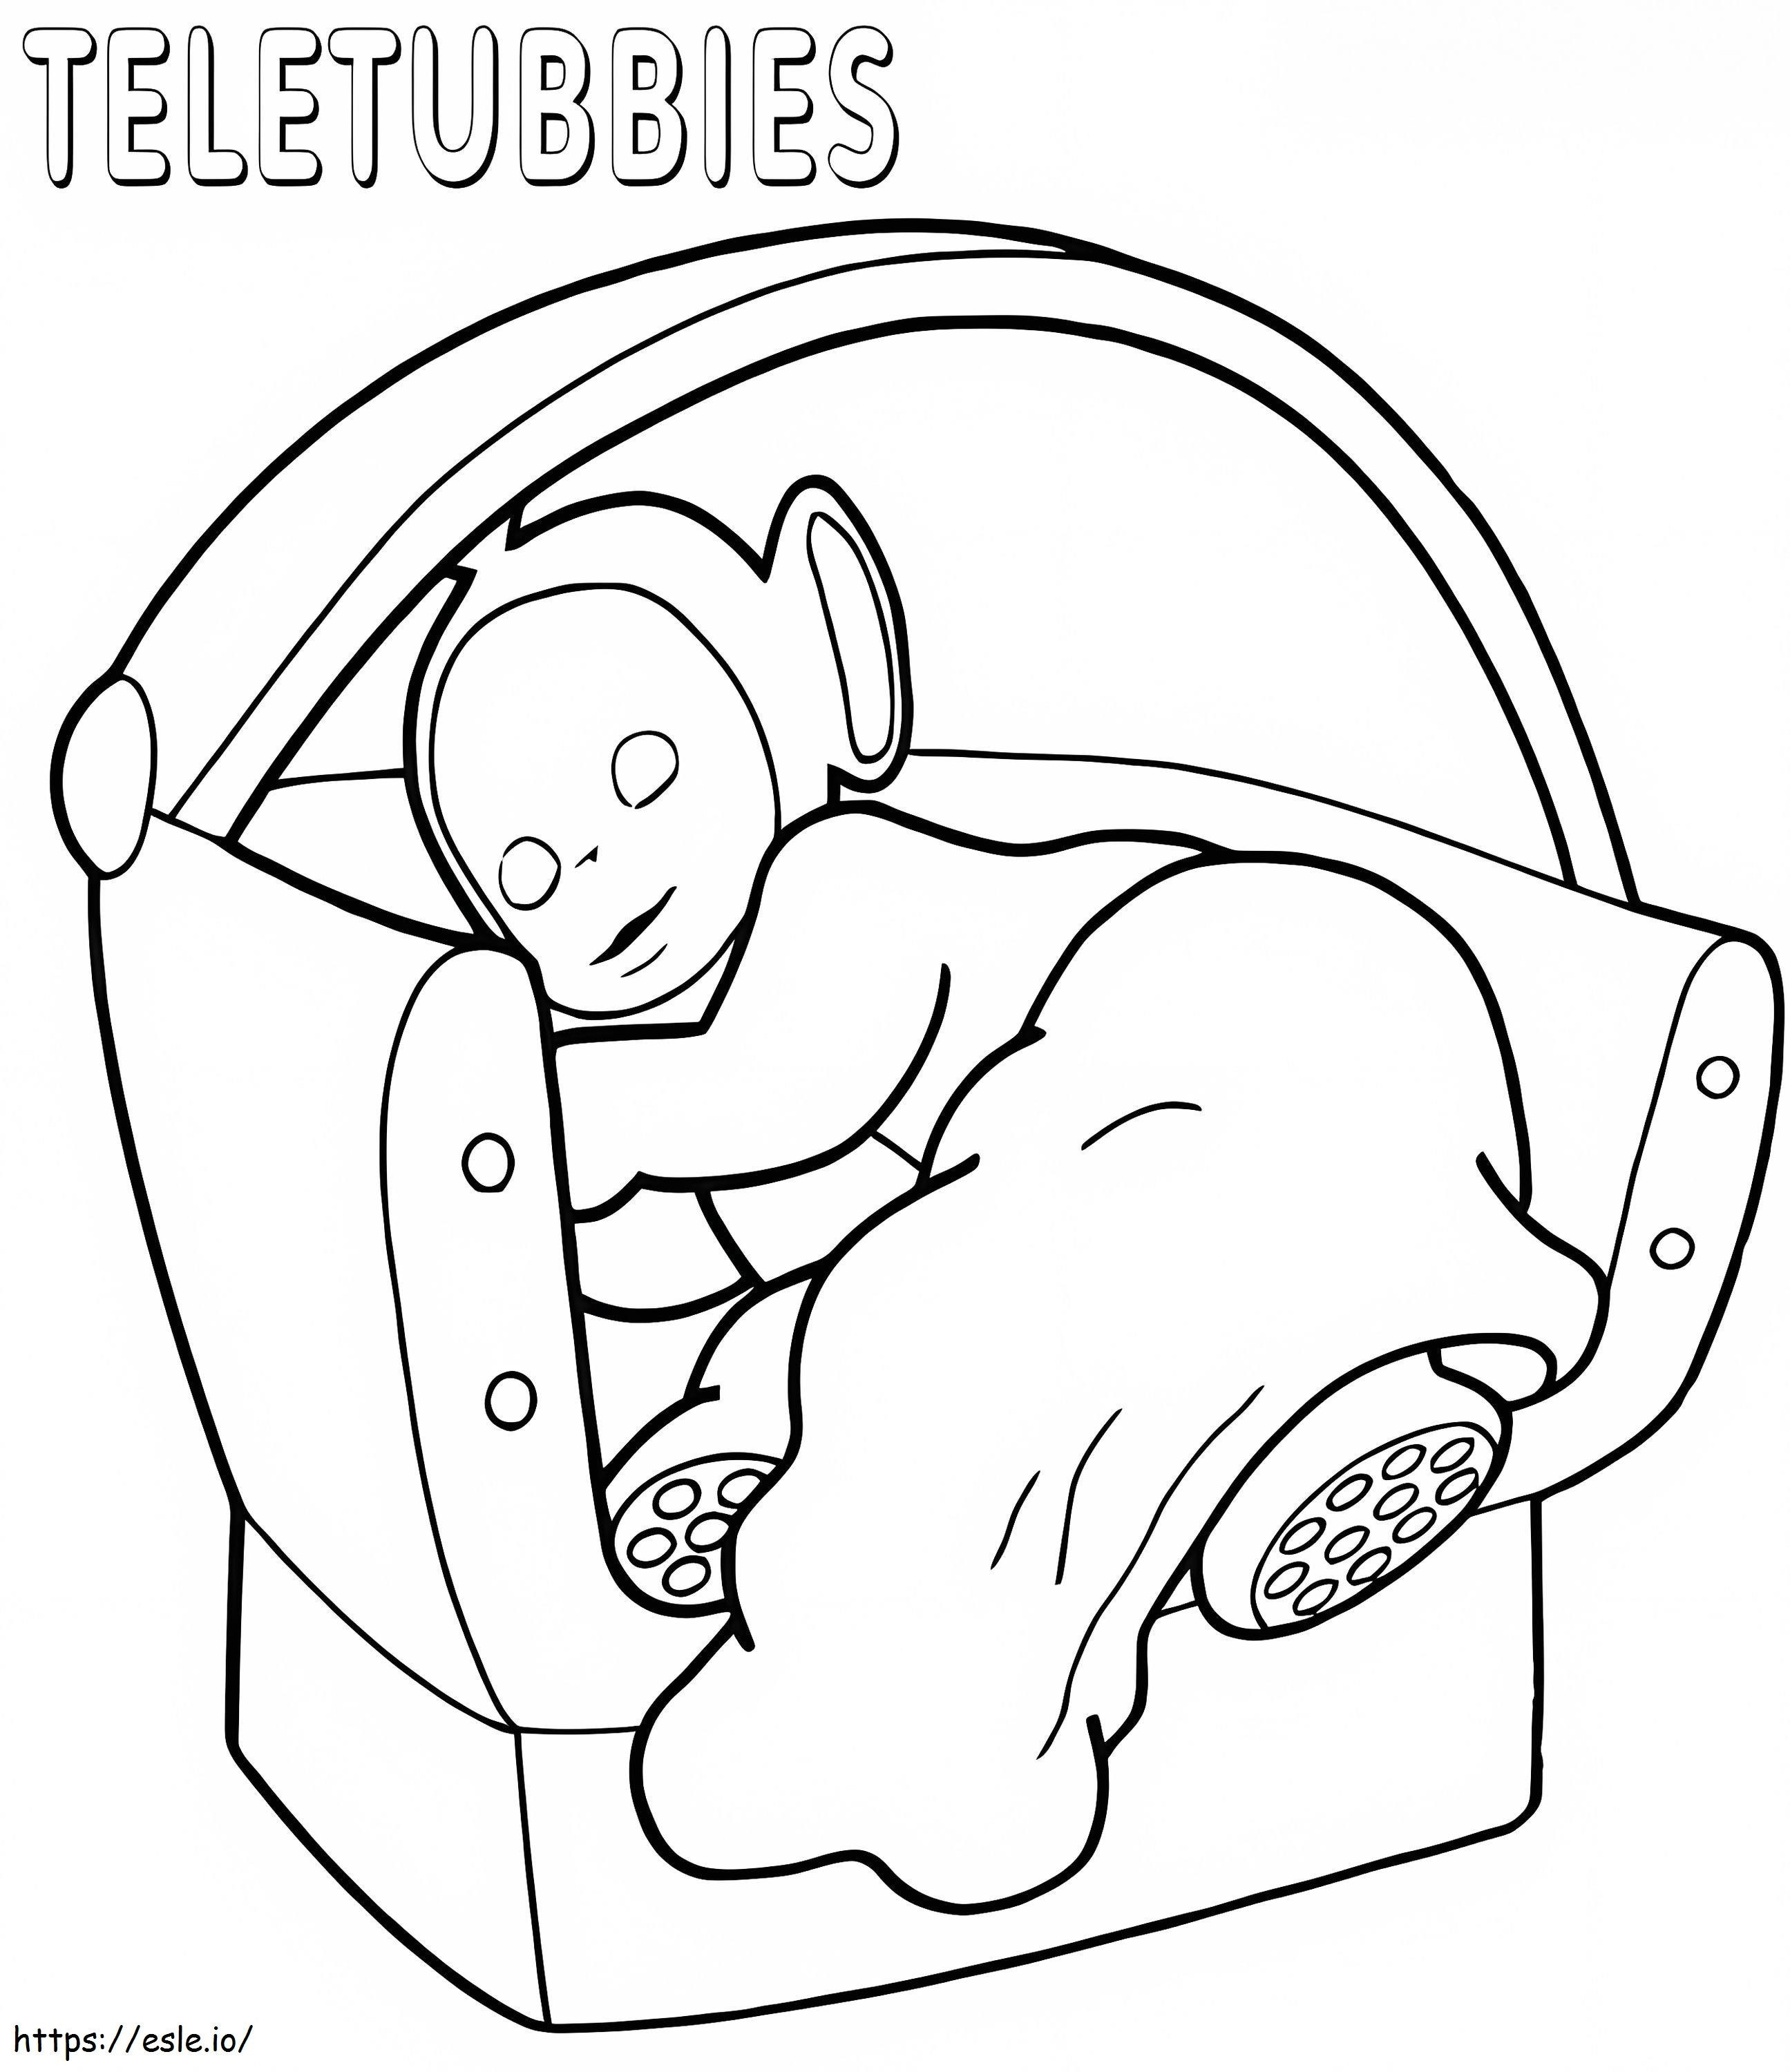 Cute Teletubbies Coloring Page coloring page